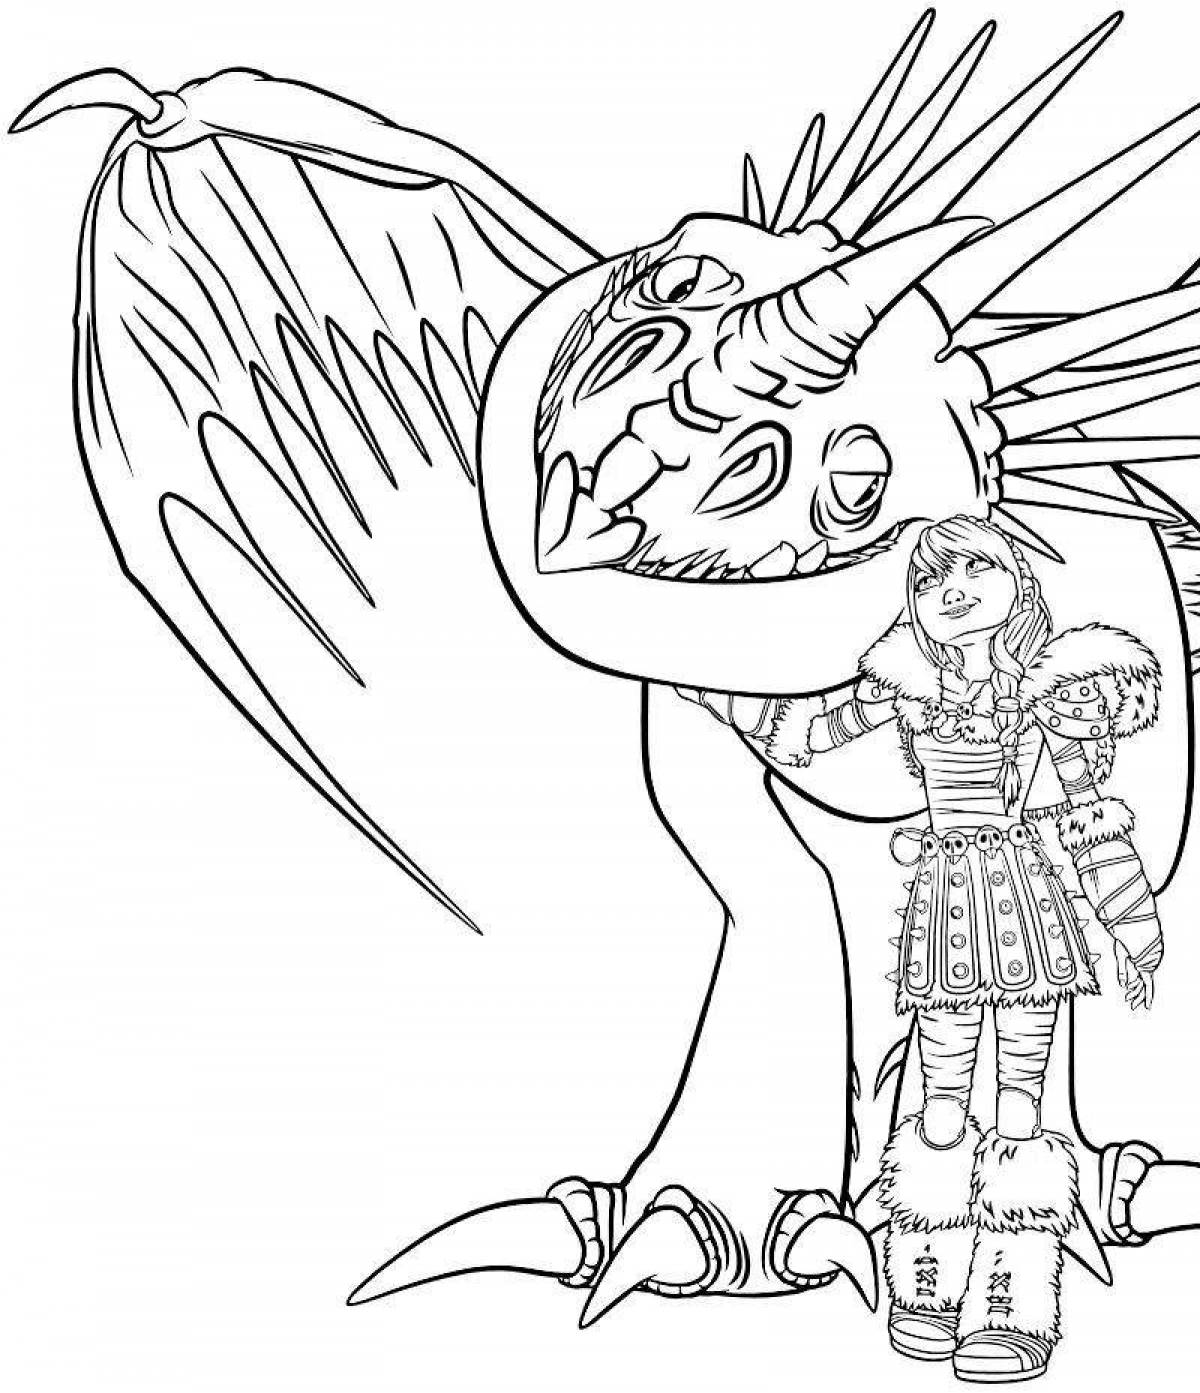 Train your dragon coloring page